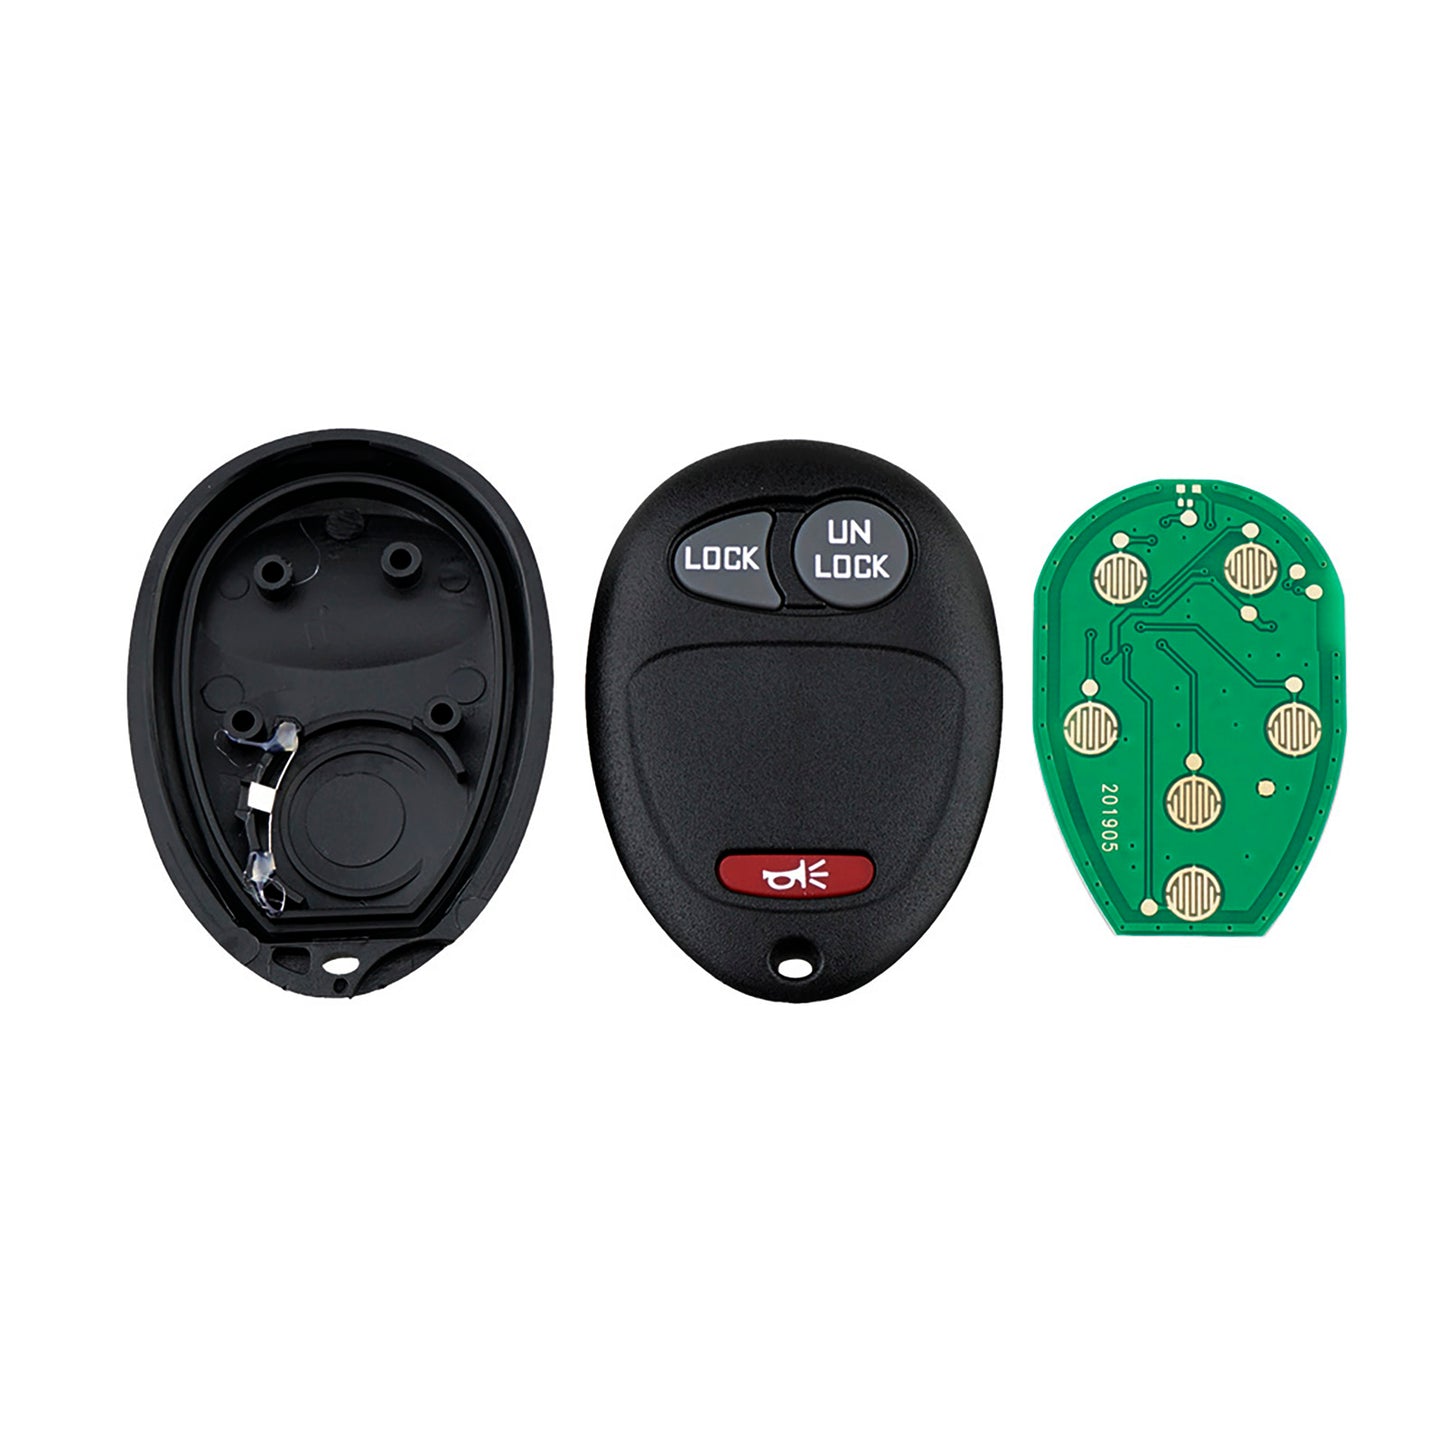 2+1 Buttons 315MHz Keyless Entry Fob Remote Car Key For 2001-2012 Chevrolet Colorado Venture without sliding doors Isuzu I Hummer H3T FCC ID: L2C0007T SKU : J111